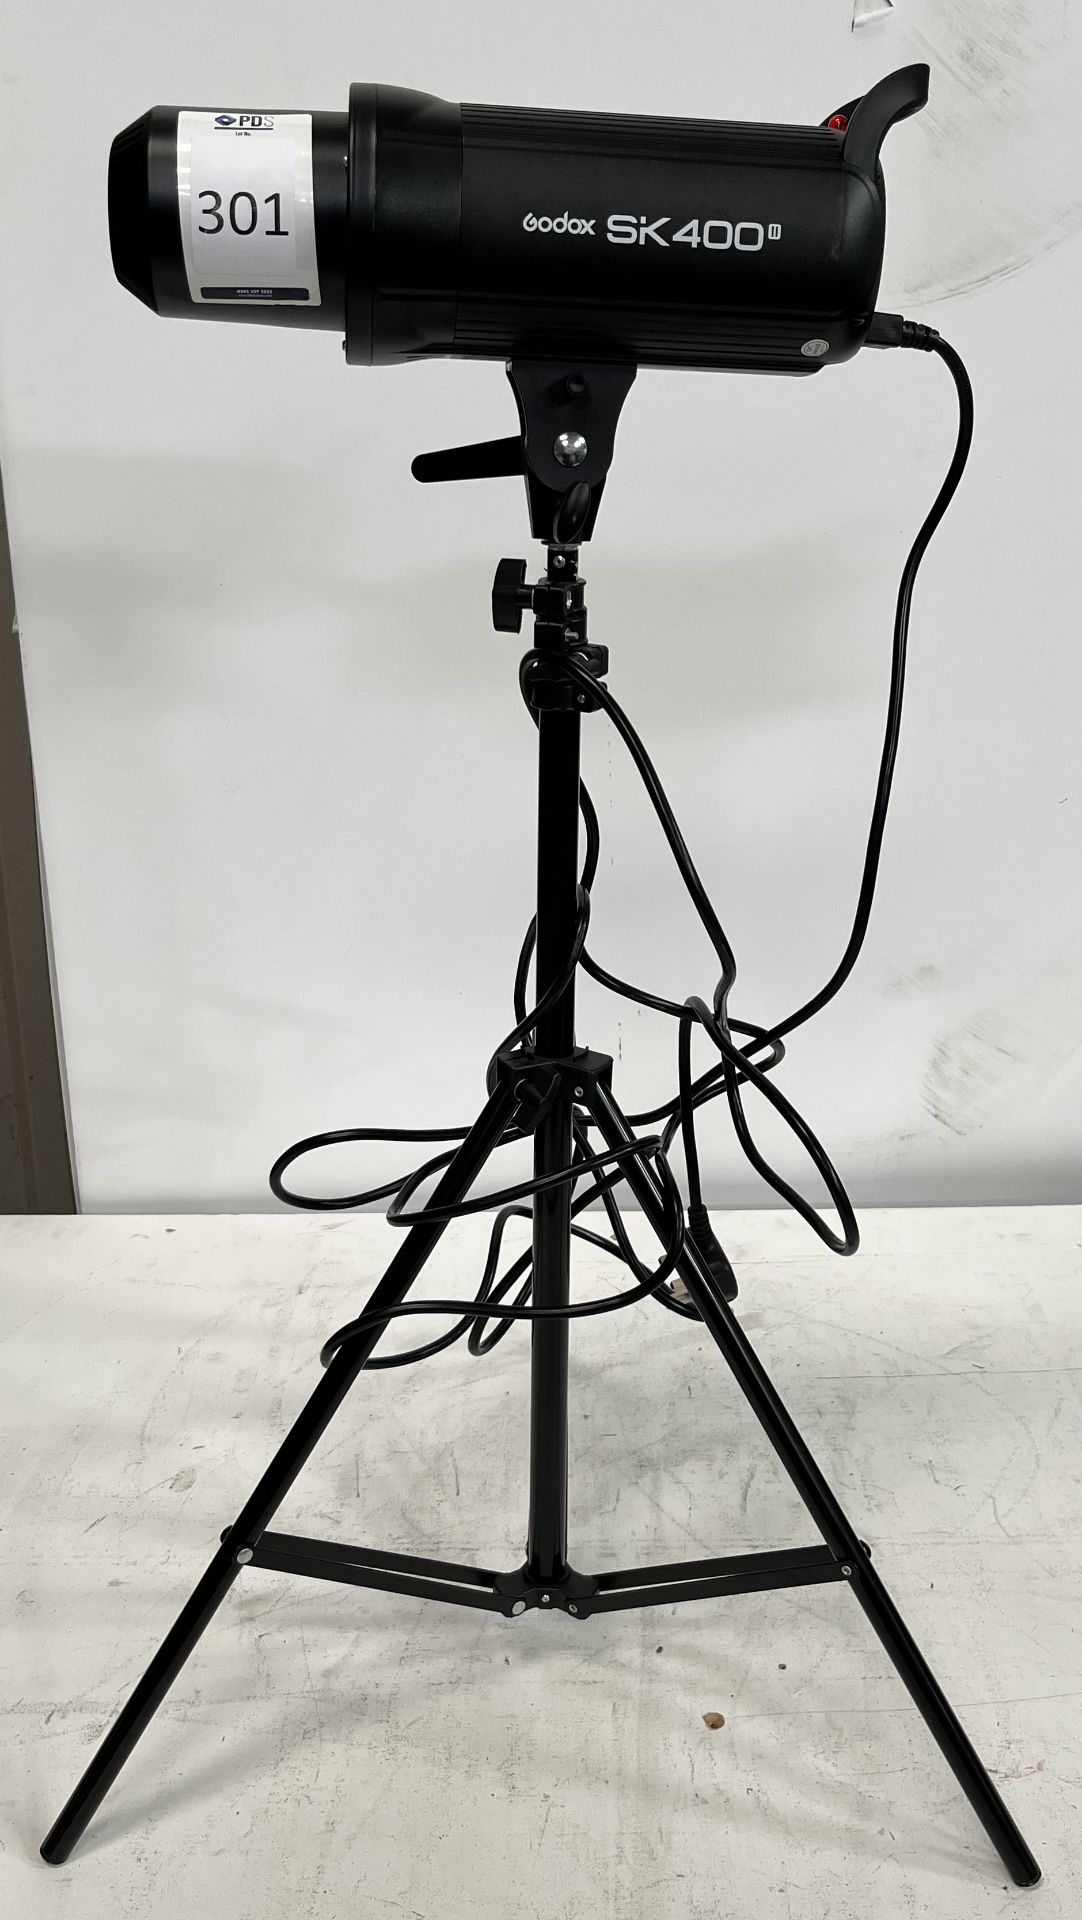 Godox SK400 Studio Light with Reflective Umbrella on Adjustable Stands (Location Brentwood. Please